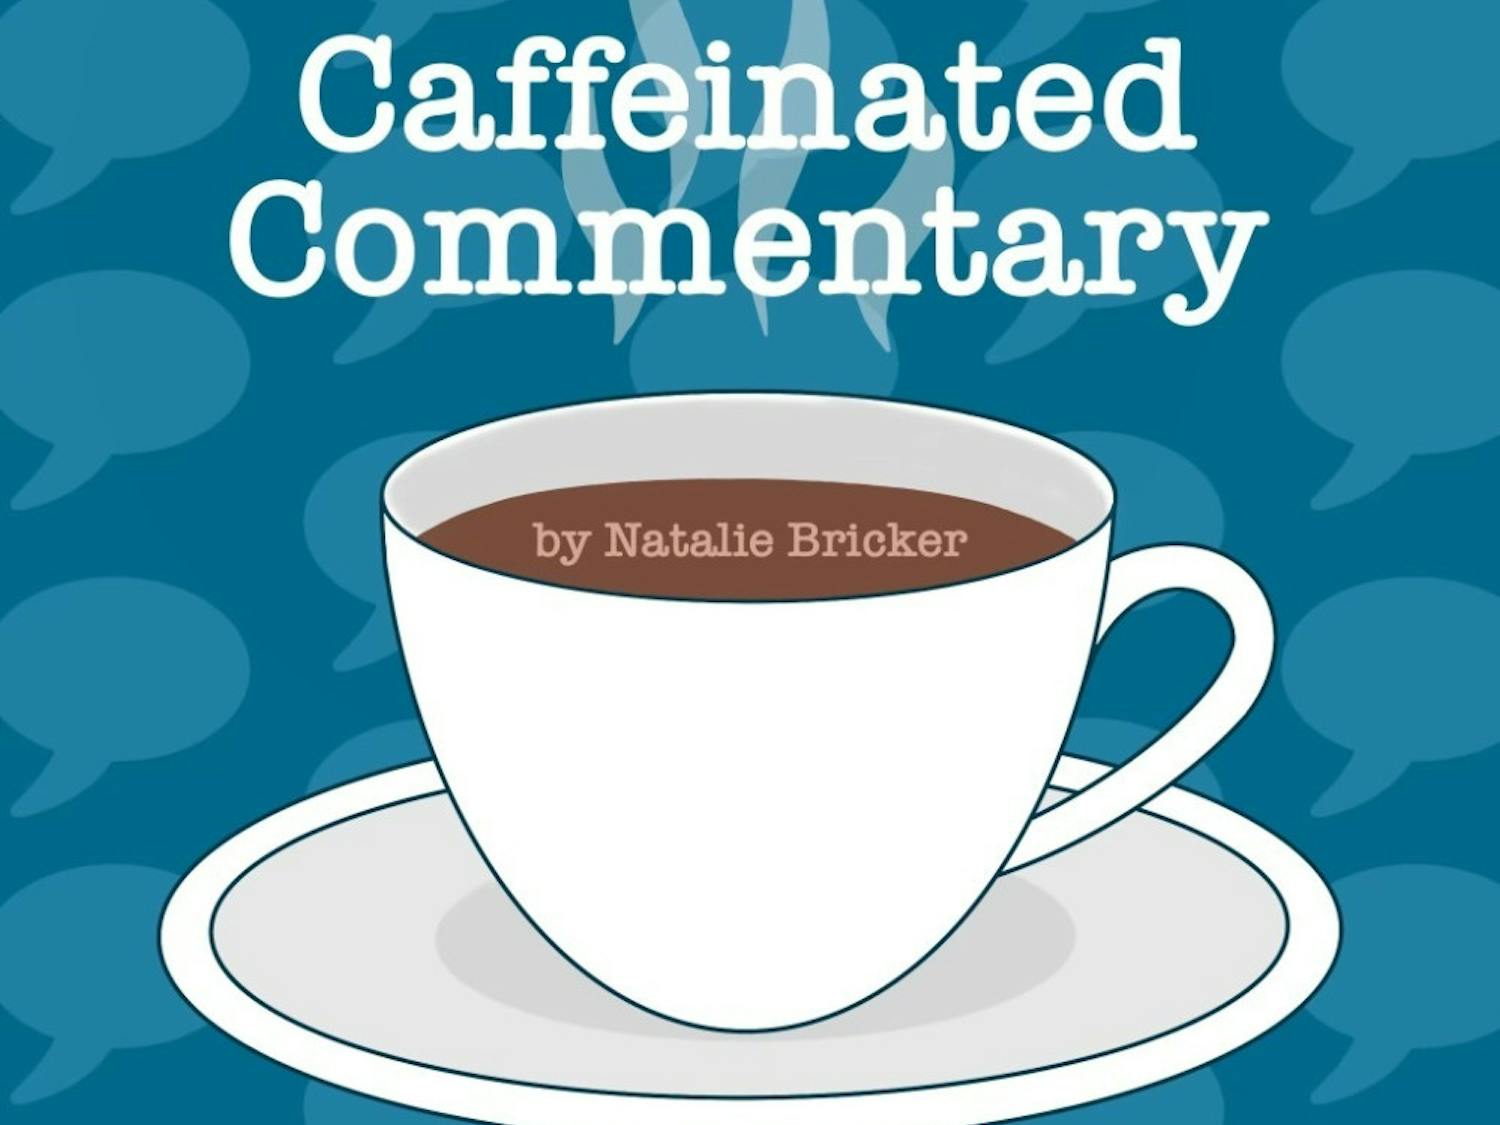 Caffeinated_Commentary_Graphic